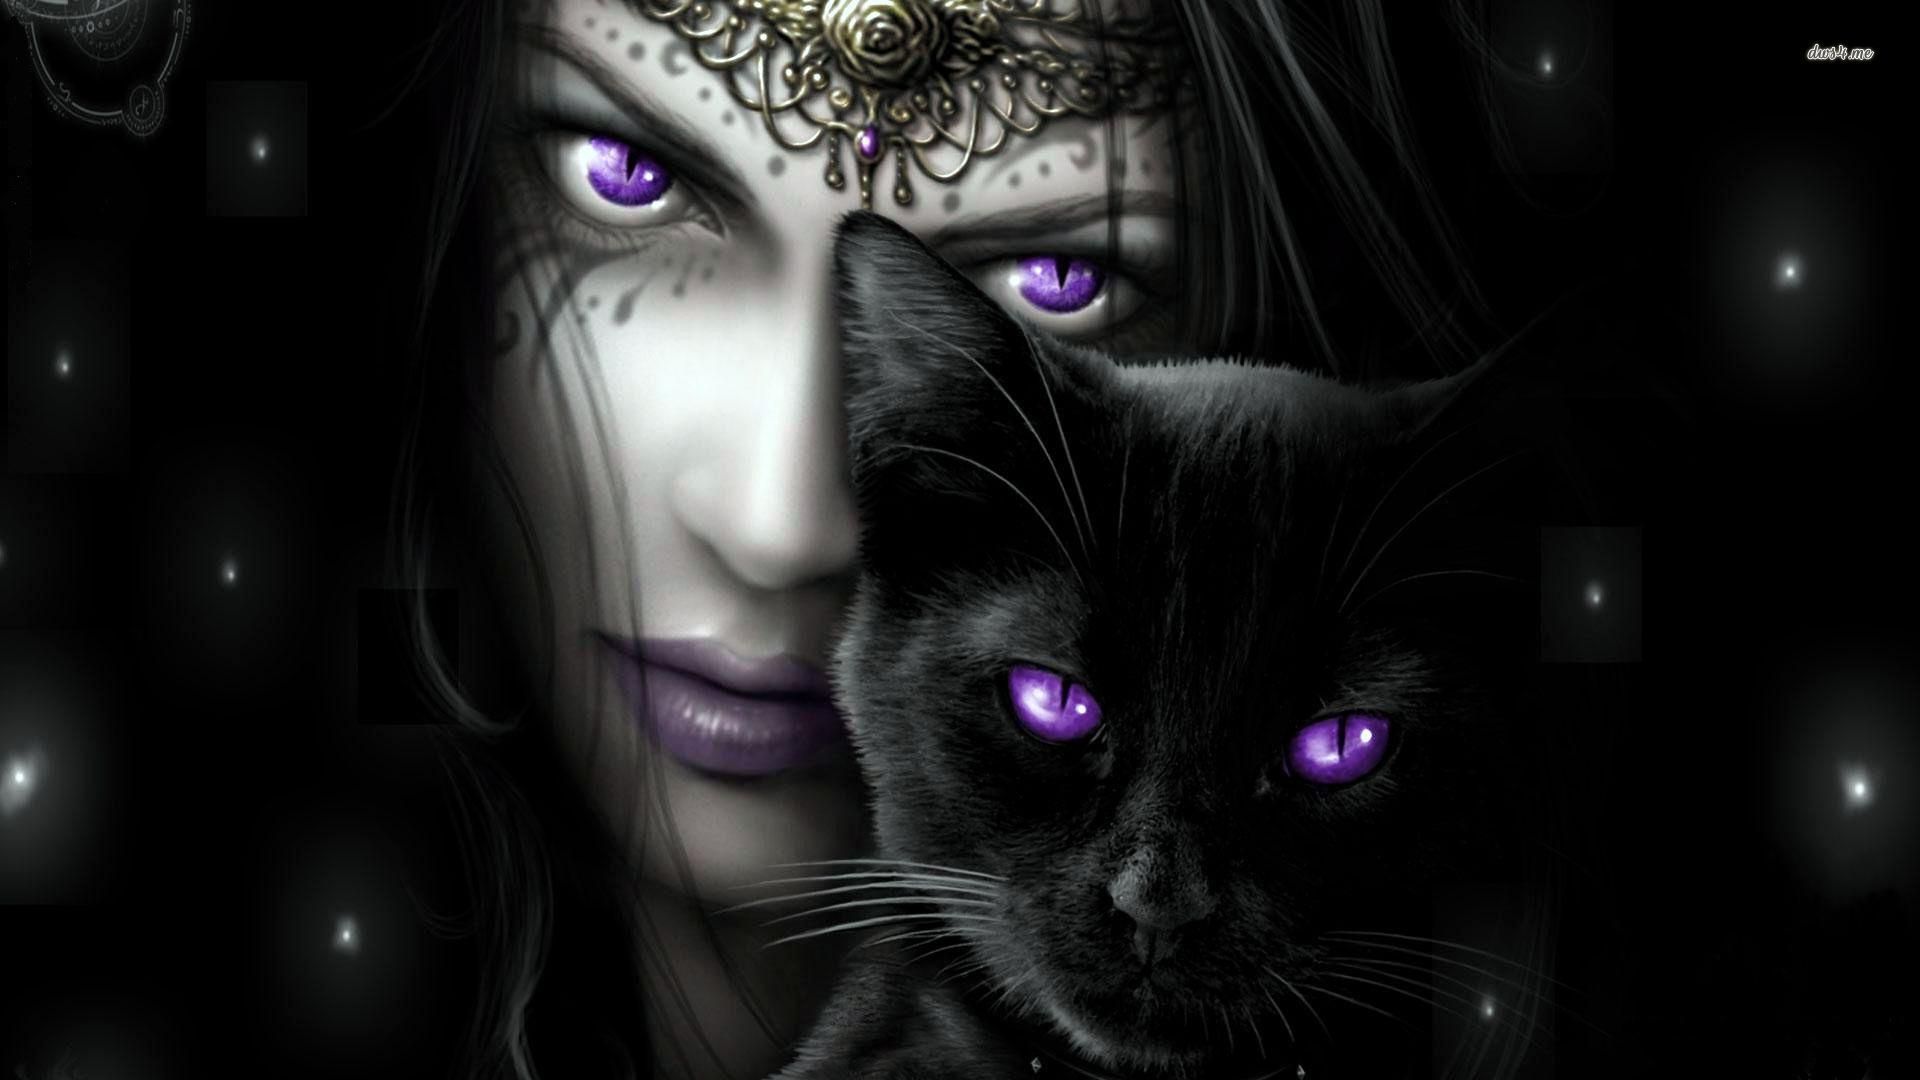 Purple eyed woman with her black cat wallpaper - Fantasy ...